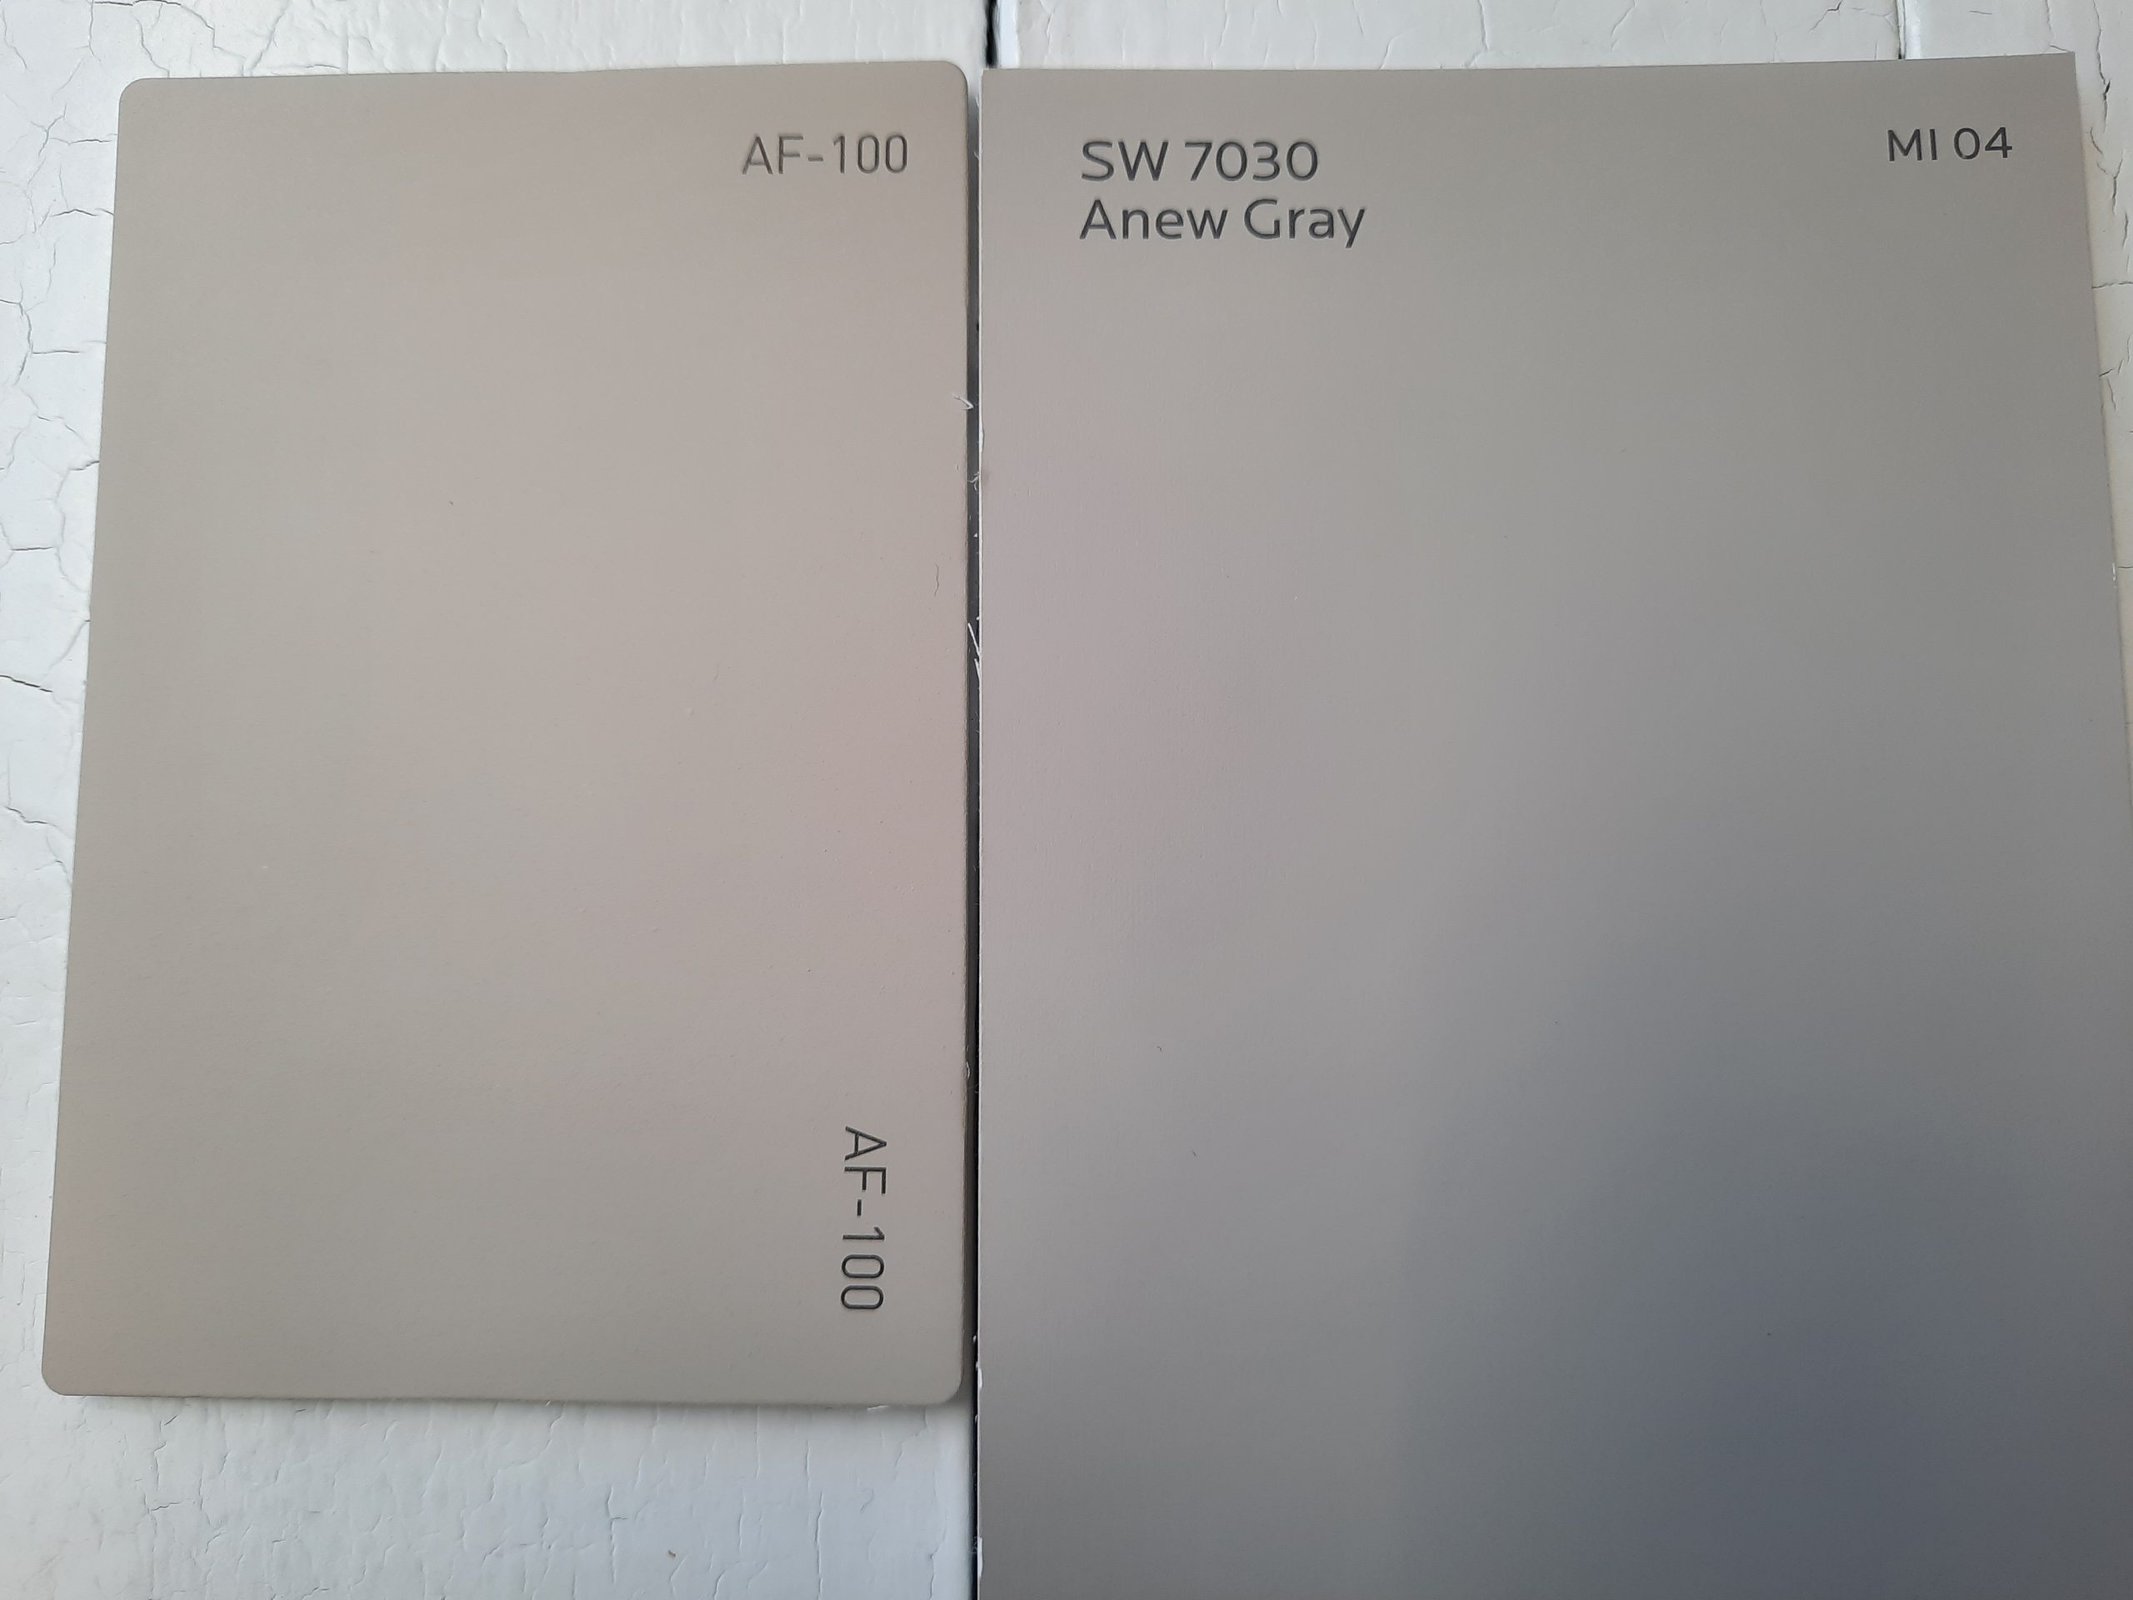 11 Pashmina vs Anew Gray by Sherwin Williams scaled